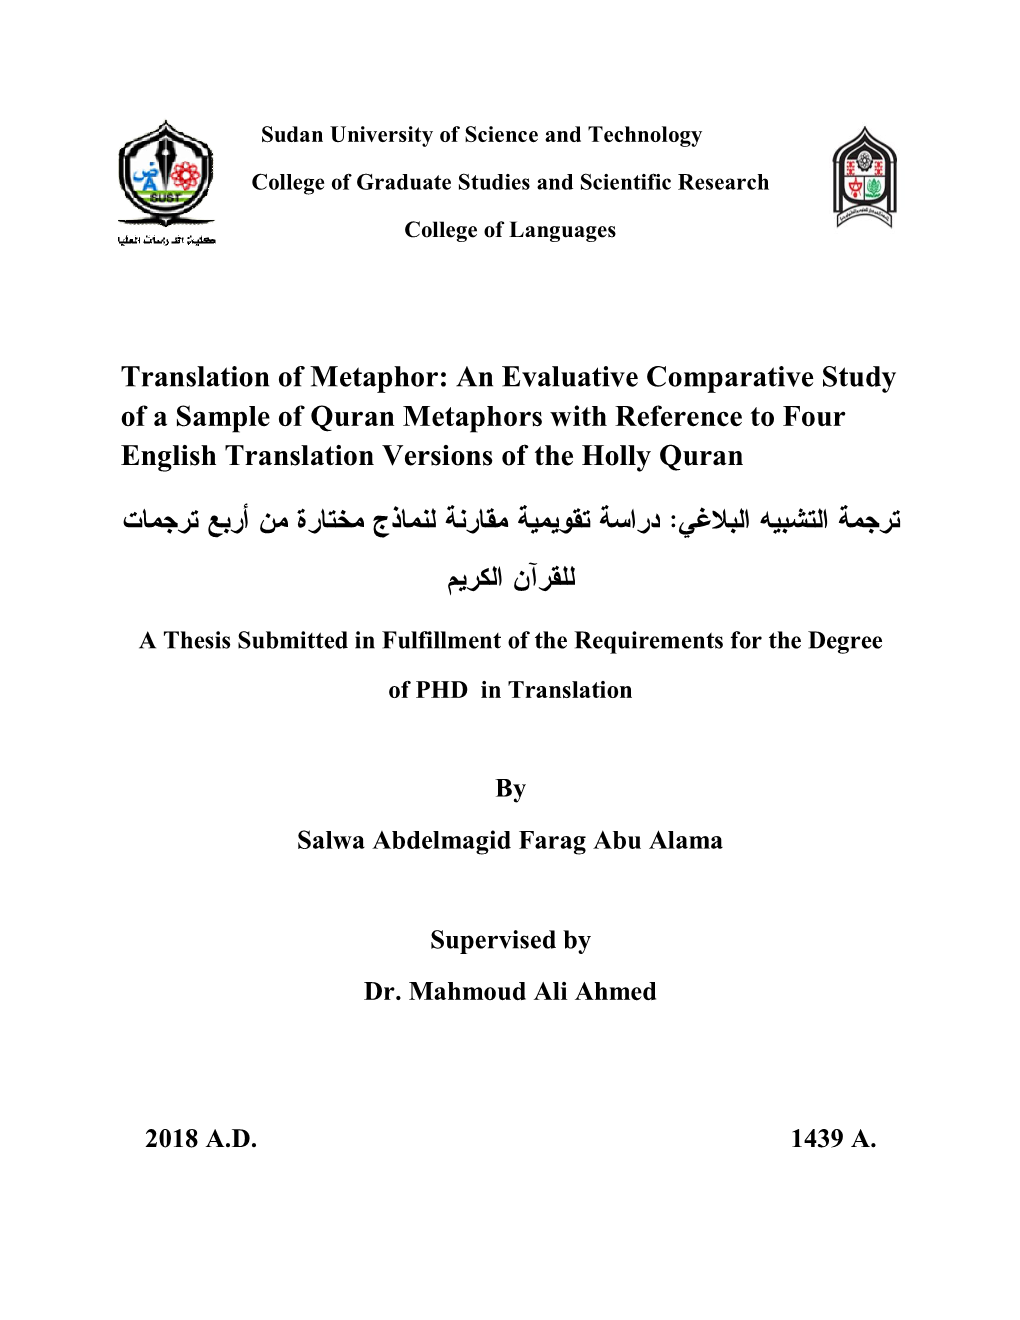 An Evaluative Comparative Study of a Sample of Quran Metaphors with Reference to Four English Translation Versions of the Holly Quran